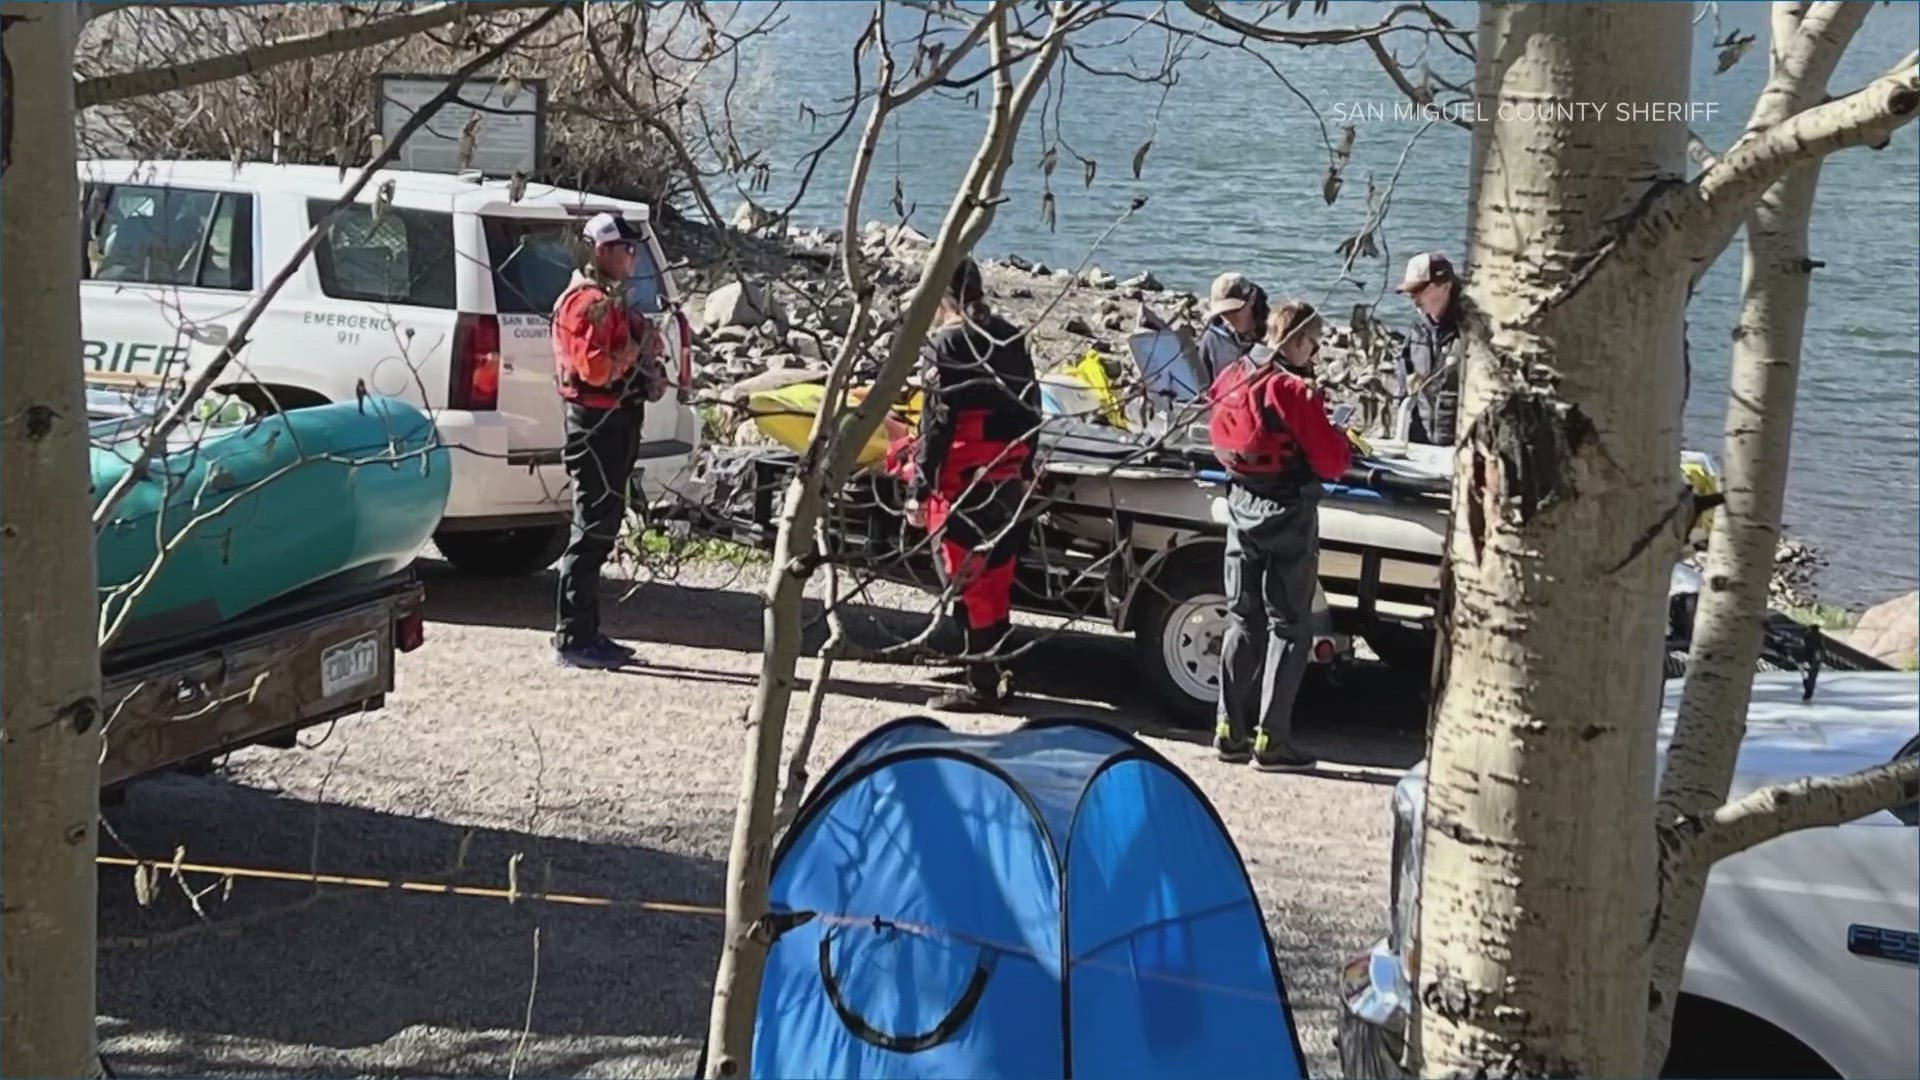 A good Samaritan who witnessed a canoe with three people inside capsize was able to rescue two people from the capsized boat and get them to shore safely.